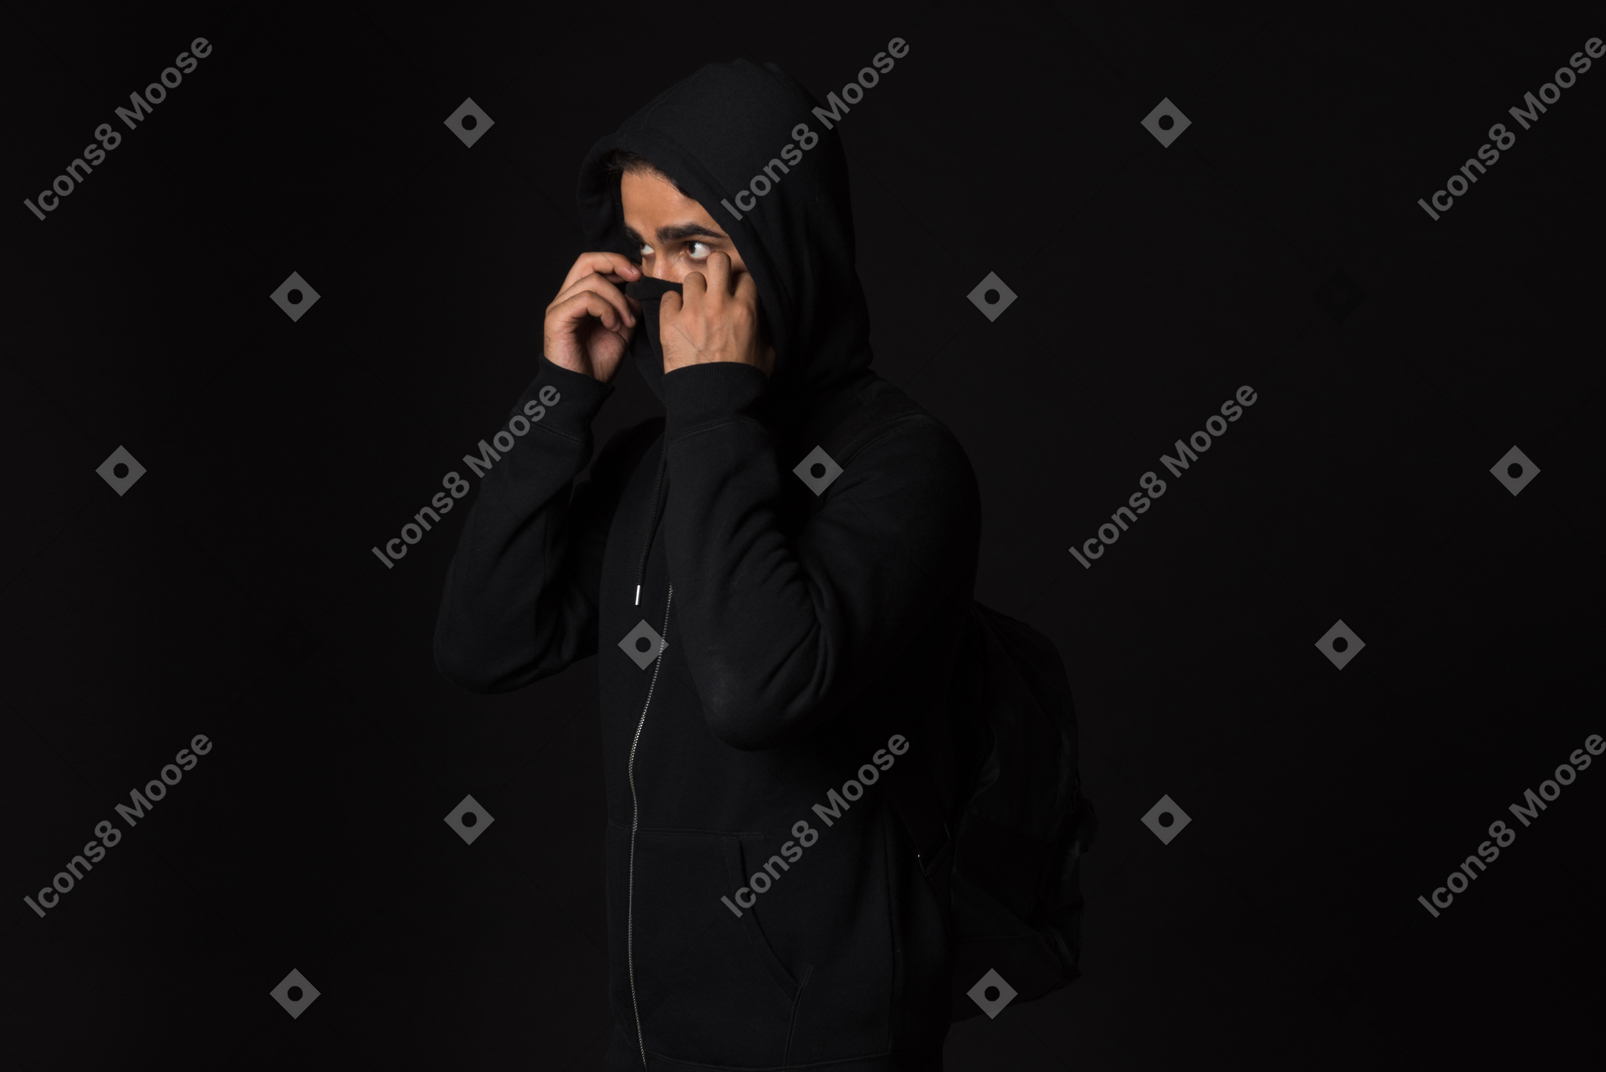 Hacker guy standing in the dark and covering his face